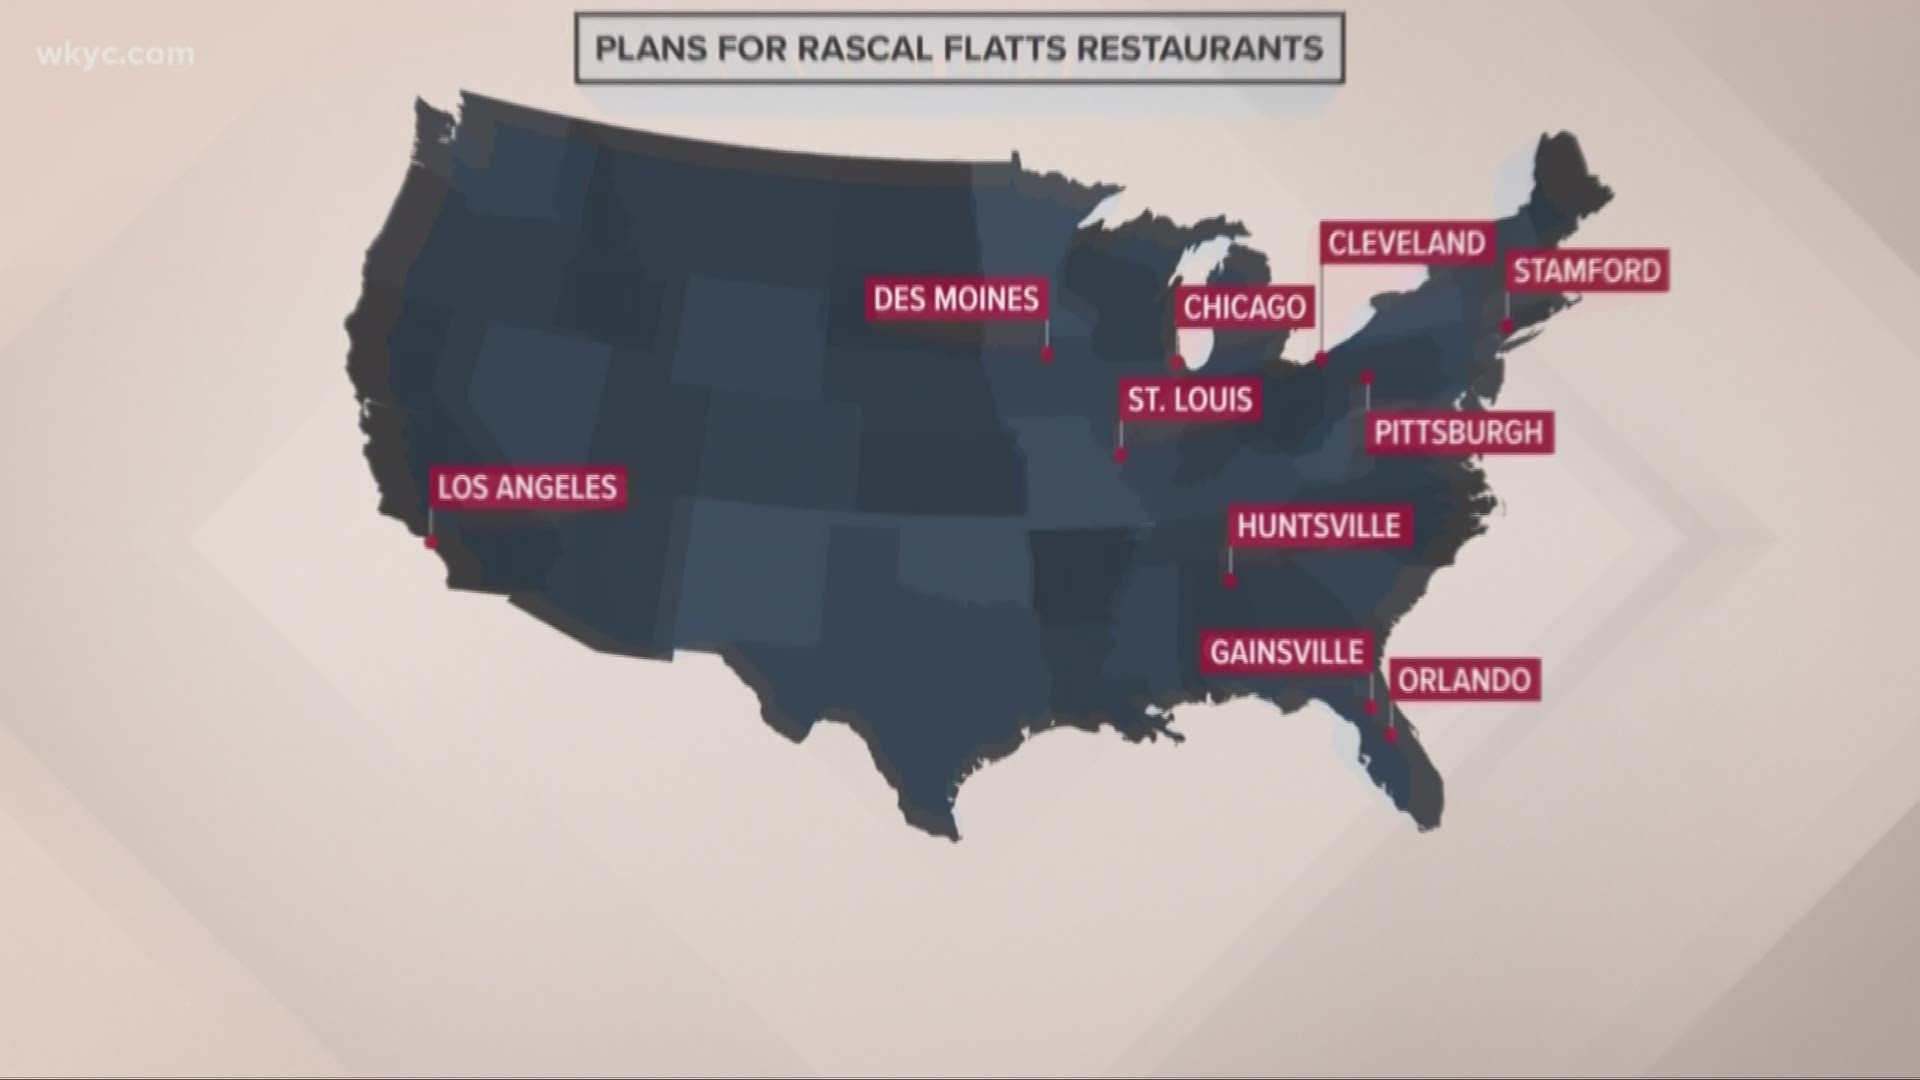 Rascal Flatts withdraws from restaurant project, questions remain on what's next for Cleveland spot